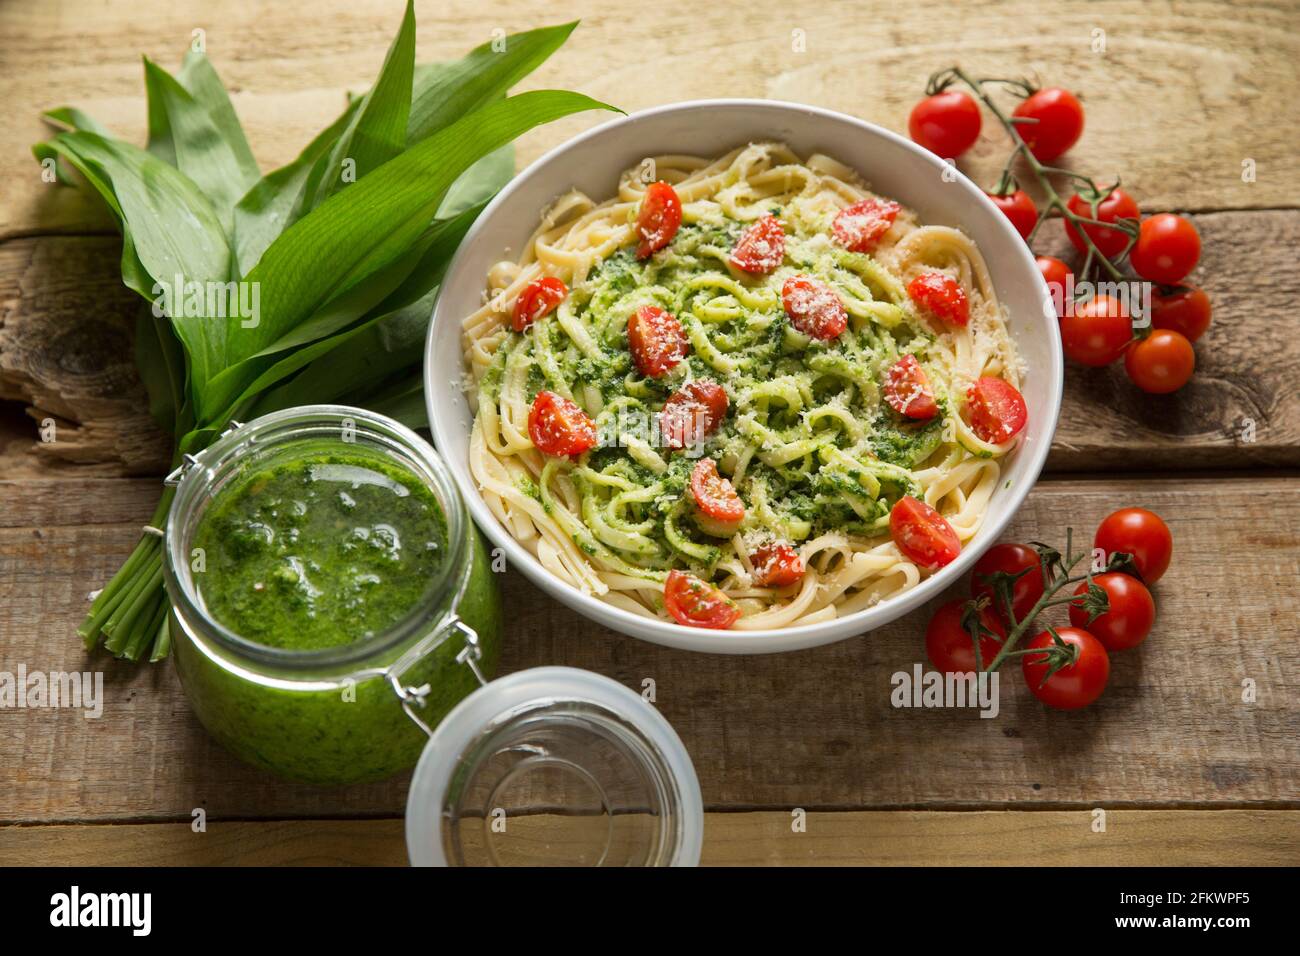 Pesto made from wild garlic, Allium ursinum, that includes rapeseed oil, lemon juice and pine nuts. It has been used to make a linguine pasta dish whi Stock Photo